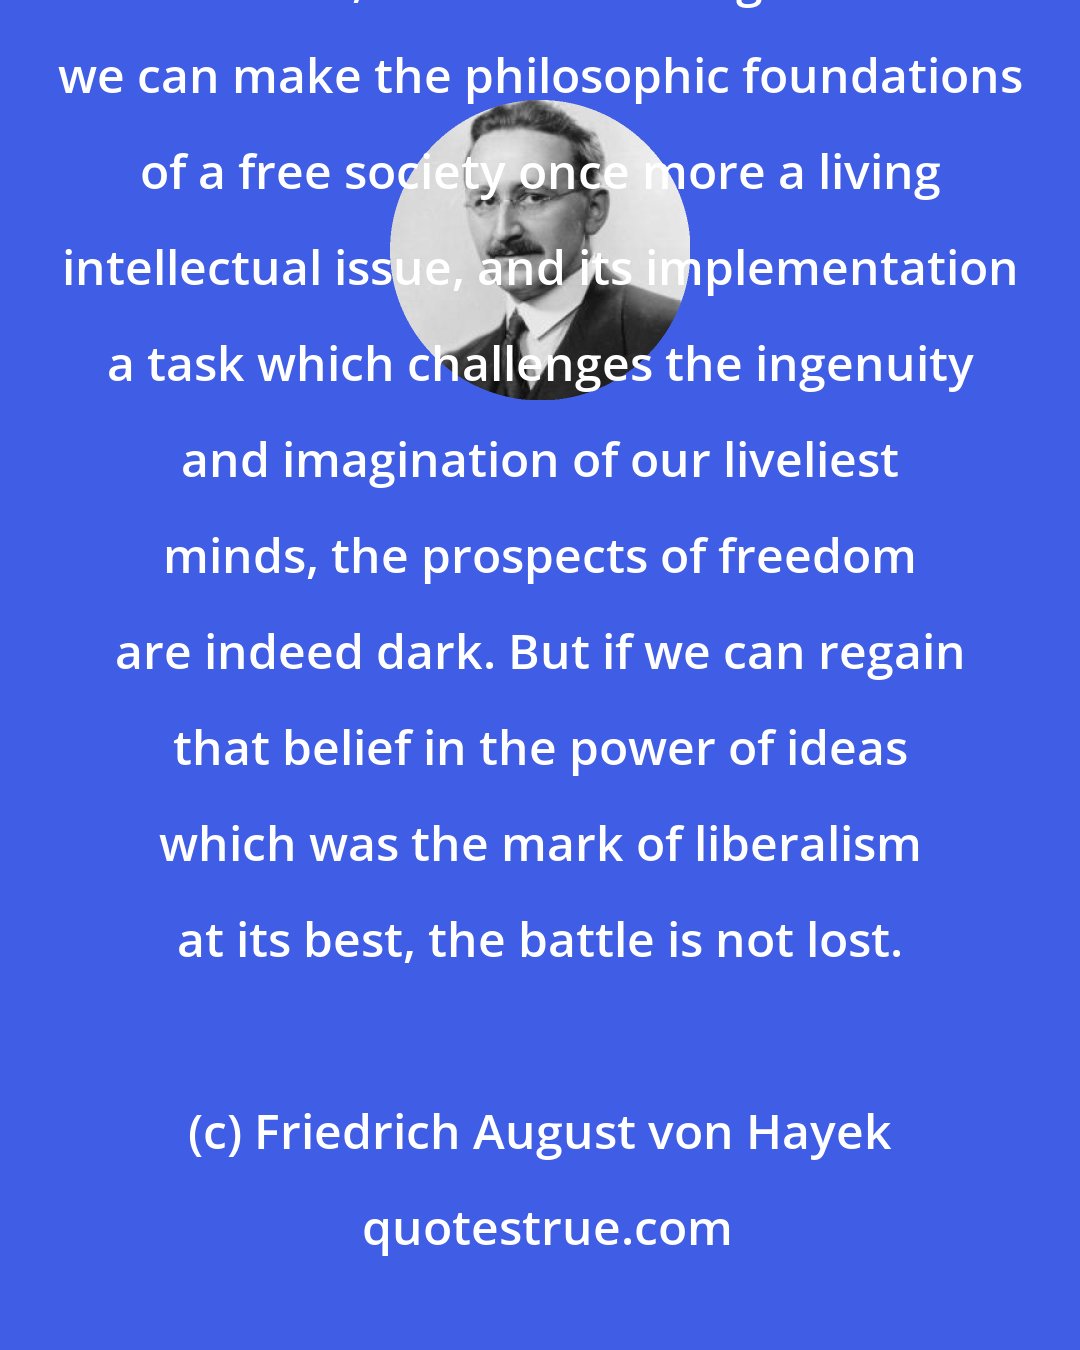 Friedrich August von Hayek: We must make the building of a free society once more an intellectual adventure, a deed of courage. Unless we can make the philosophic foundations of a free society once more a living intellectual issue, and its implementation a task which challenges the ingenuity and imagination of our liveliest minds, the prospects of freedom are indeed dark. But if we can regain that belief in the power of ideas which was the mark of liberalism at its best, the battle is not lost.